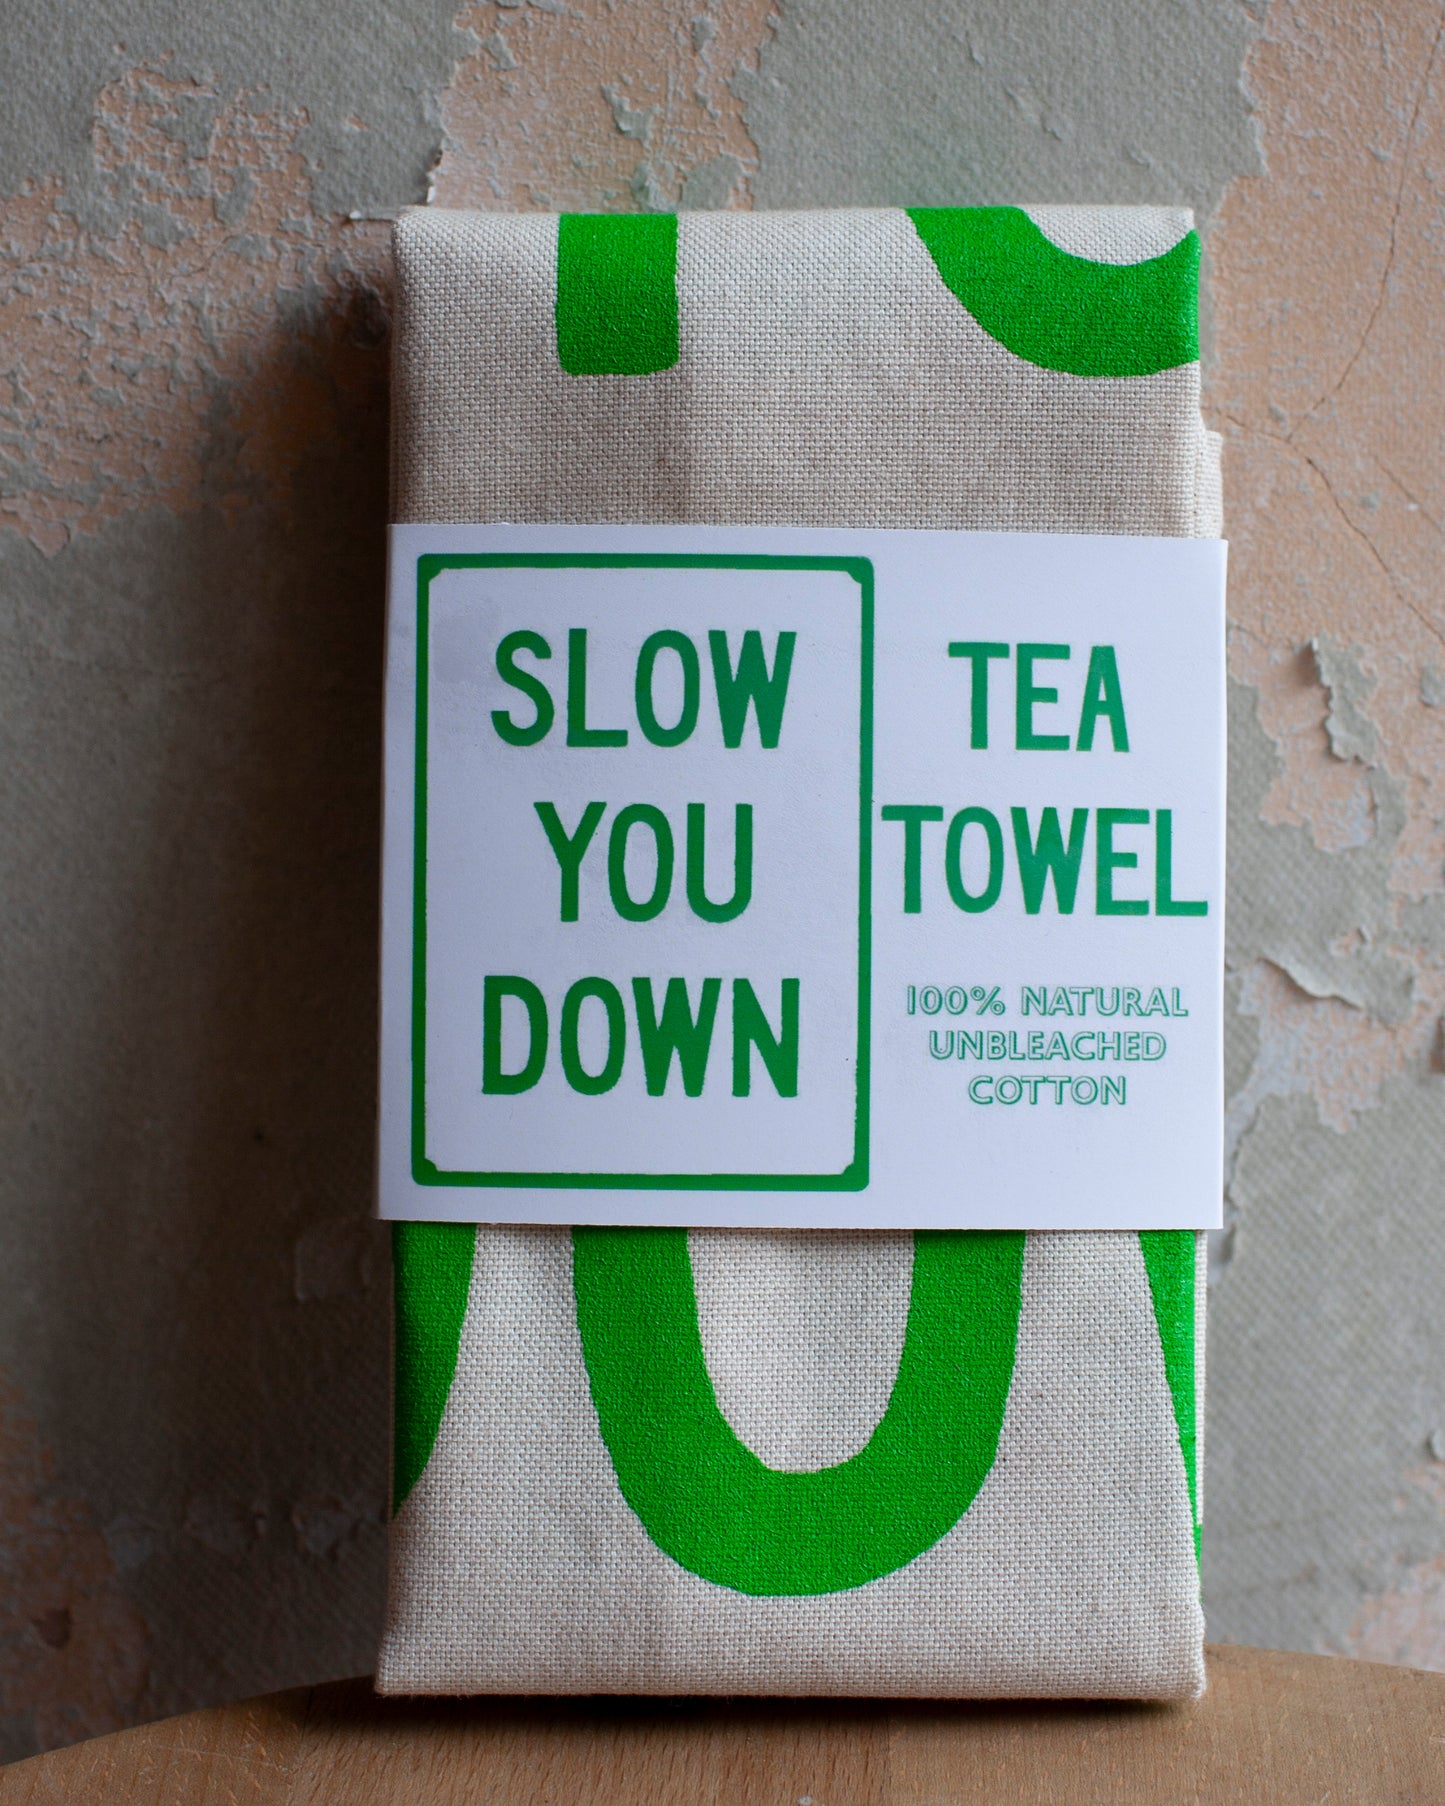 Slow you Down t-towel